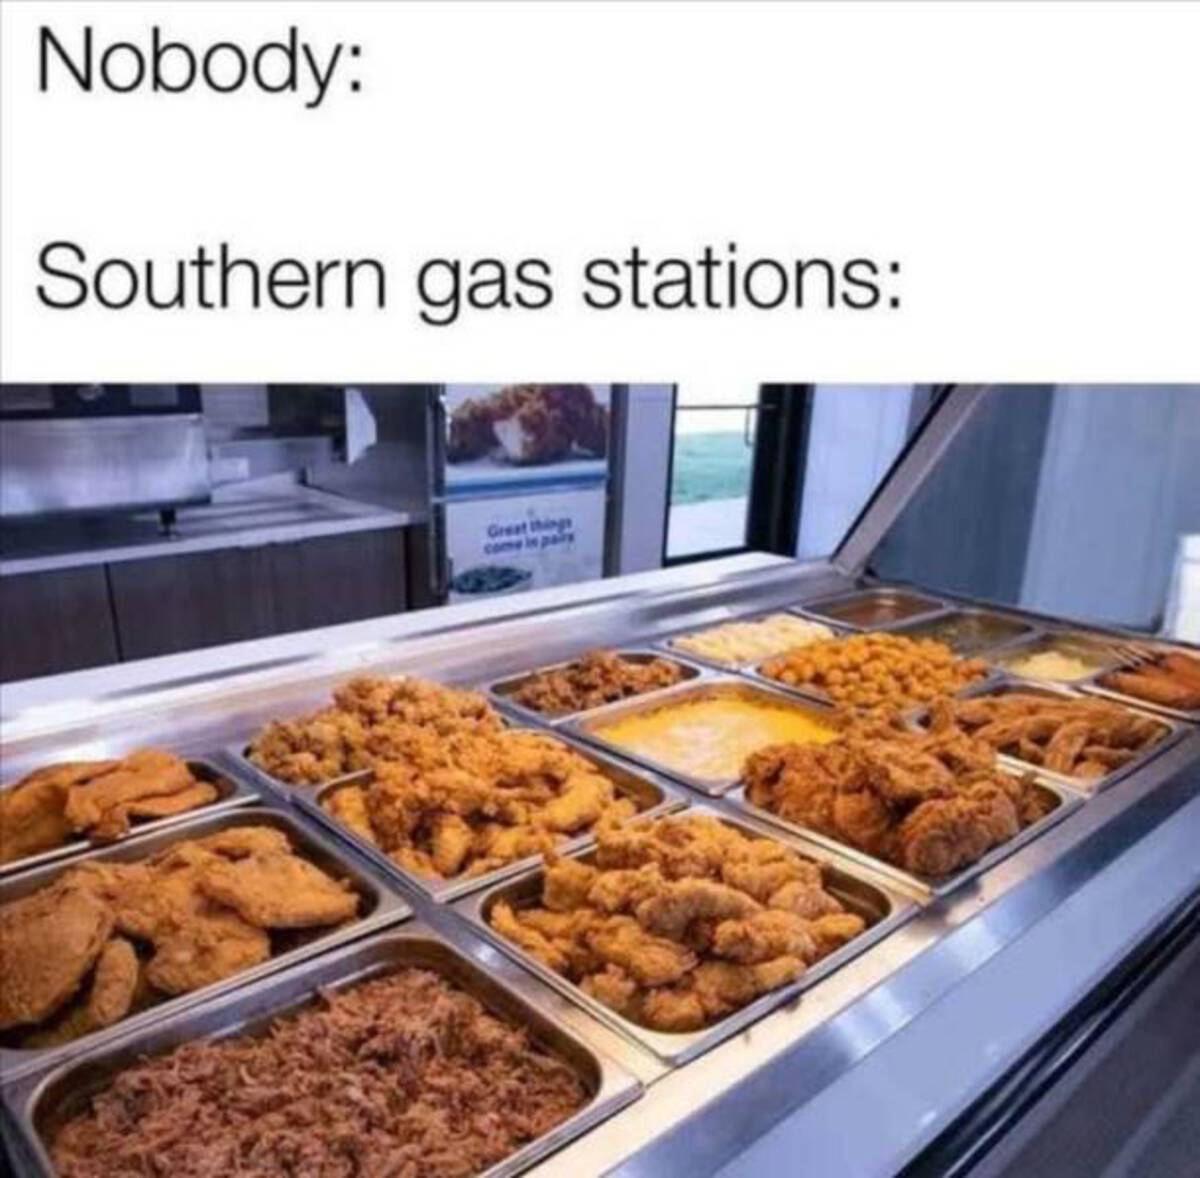 southern gas station meme - Nobody Southern gas stations Great things come in pairs